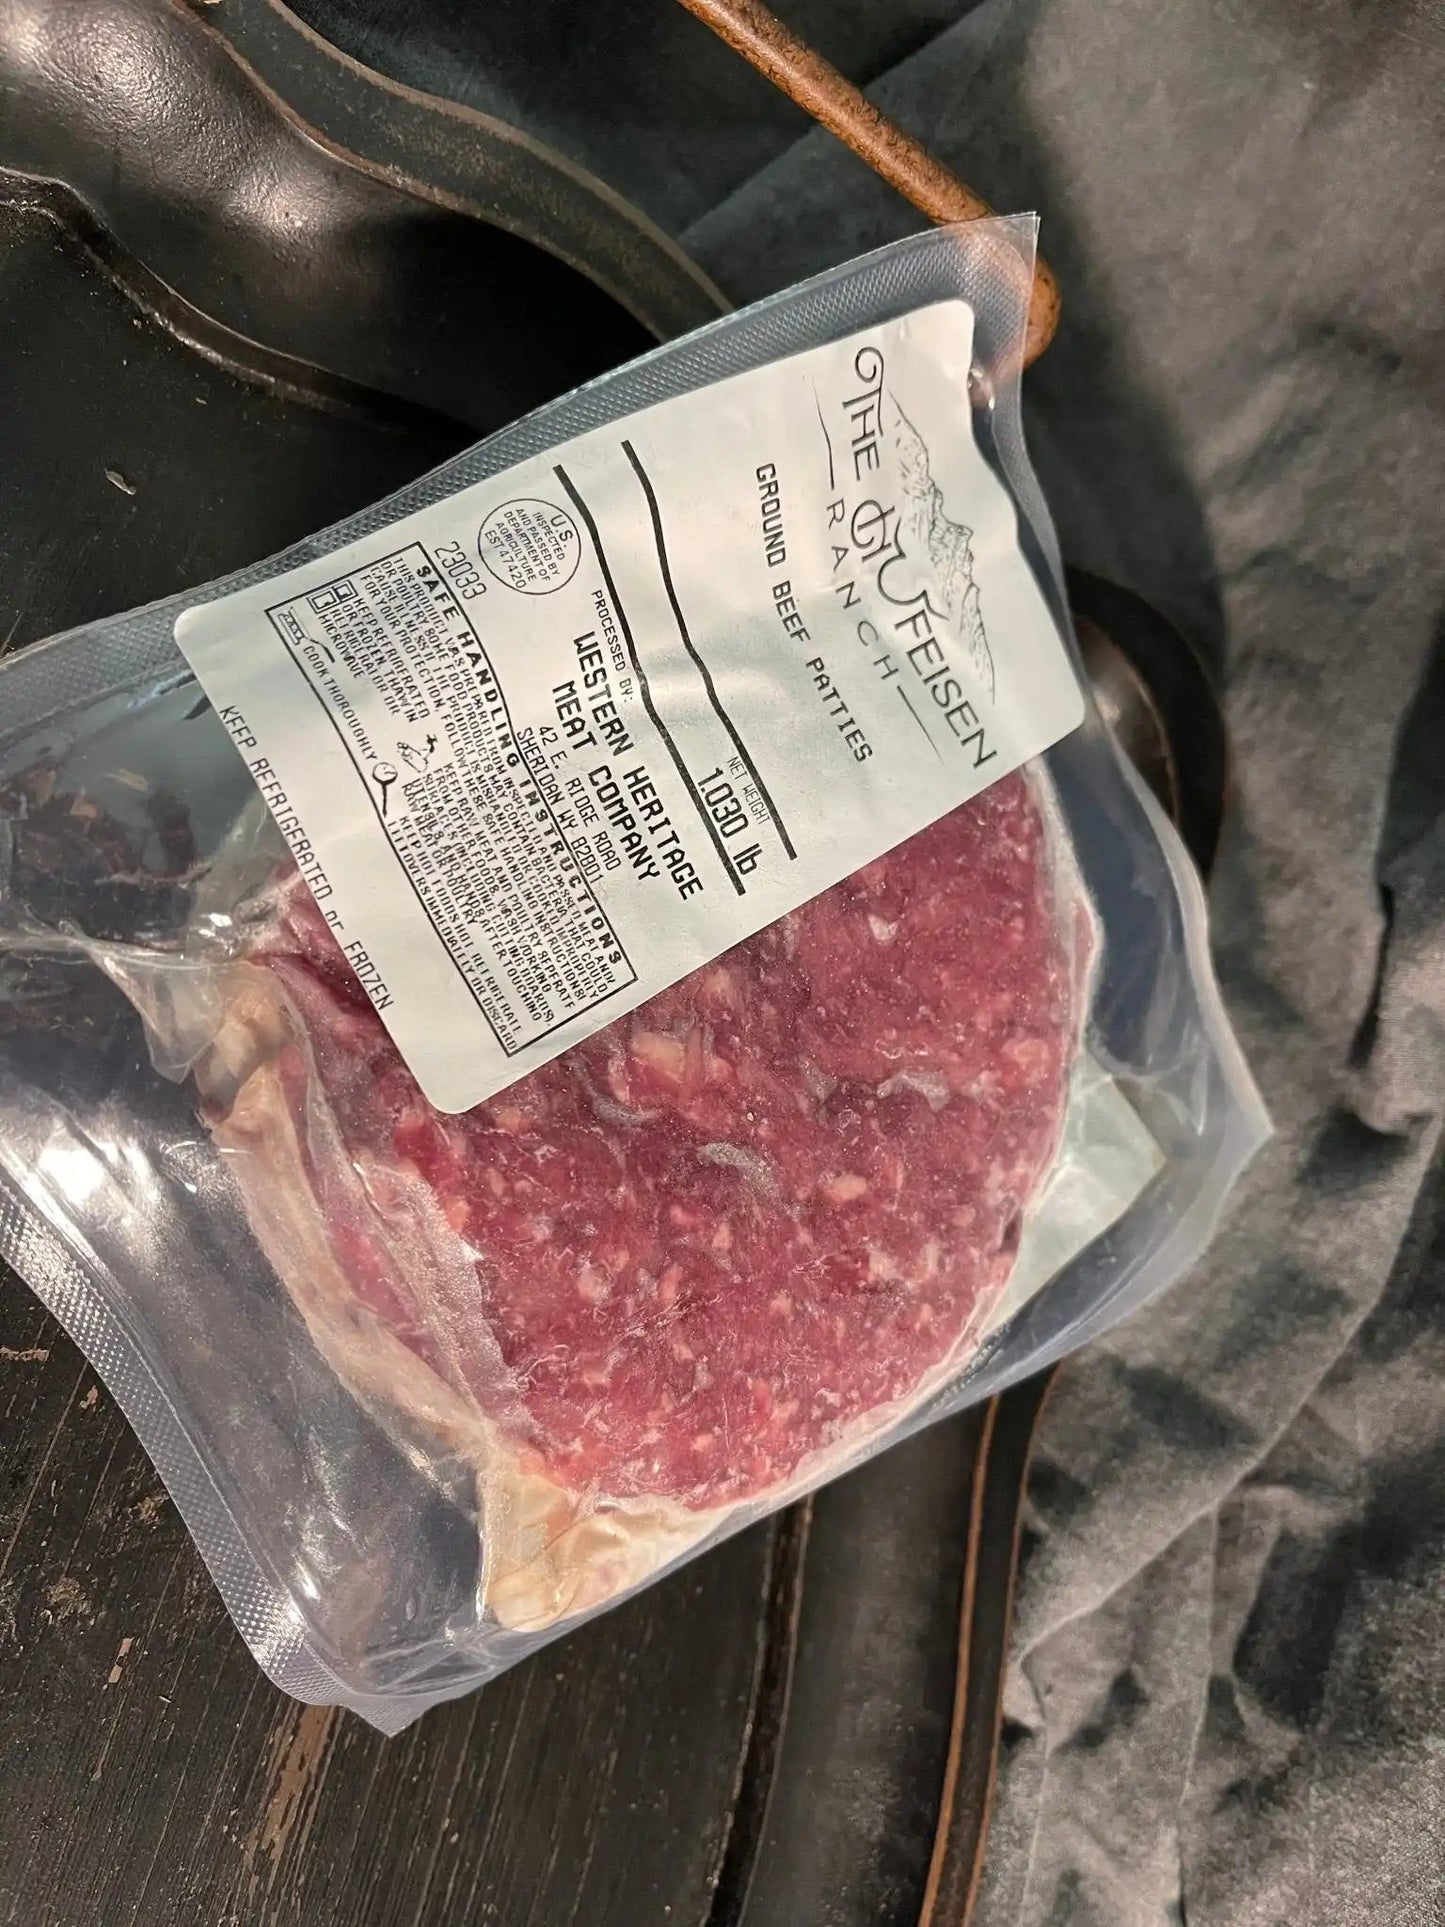 100% All-Natural Grass-Fed "Misfit" (3) 1/3lb 70/30 Beef Patties - The Hufeisen-Ranch (WYO Wagyu)